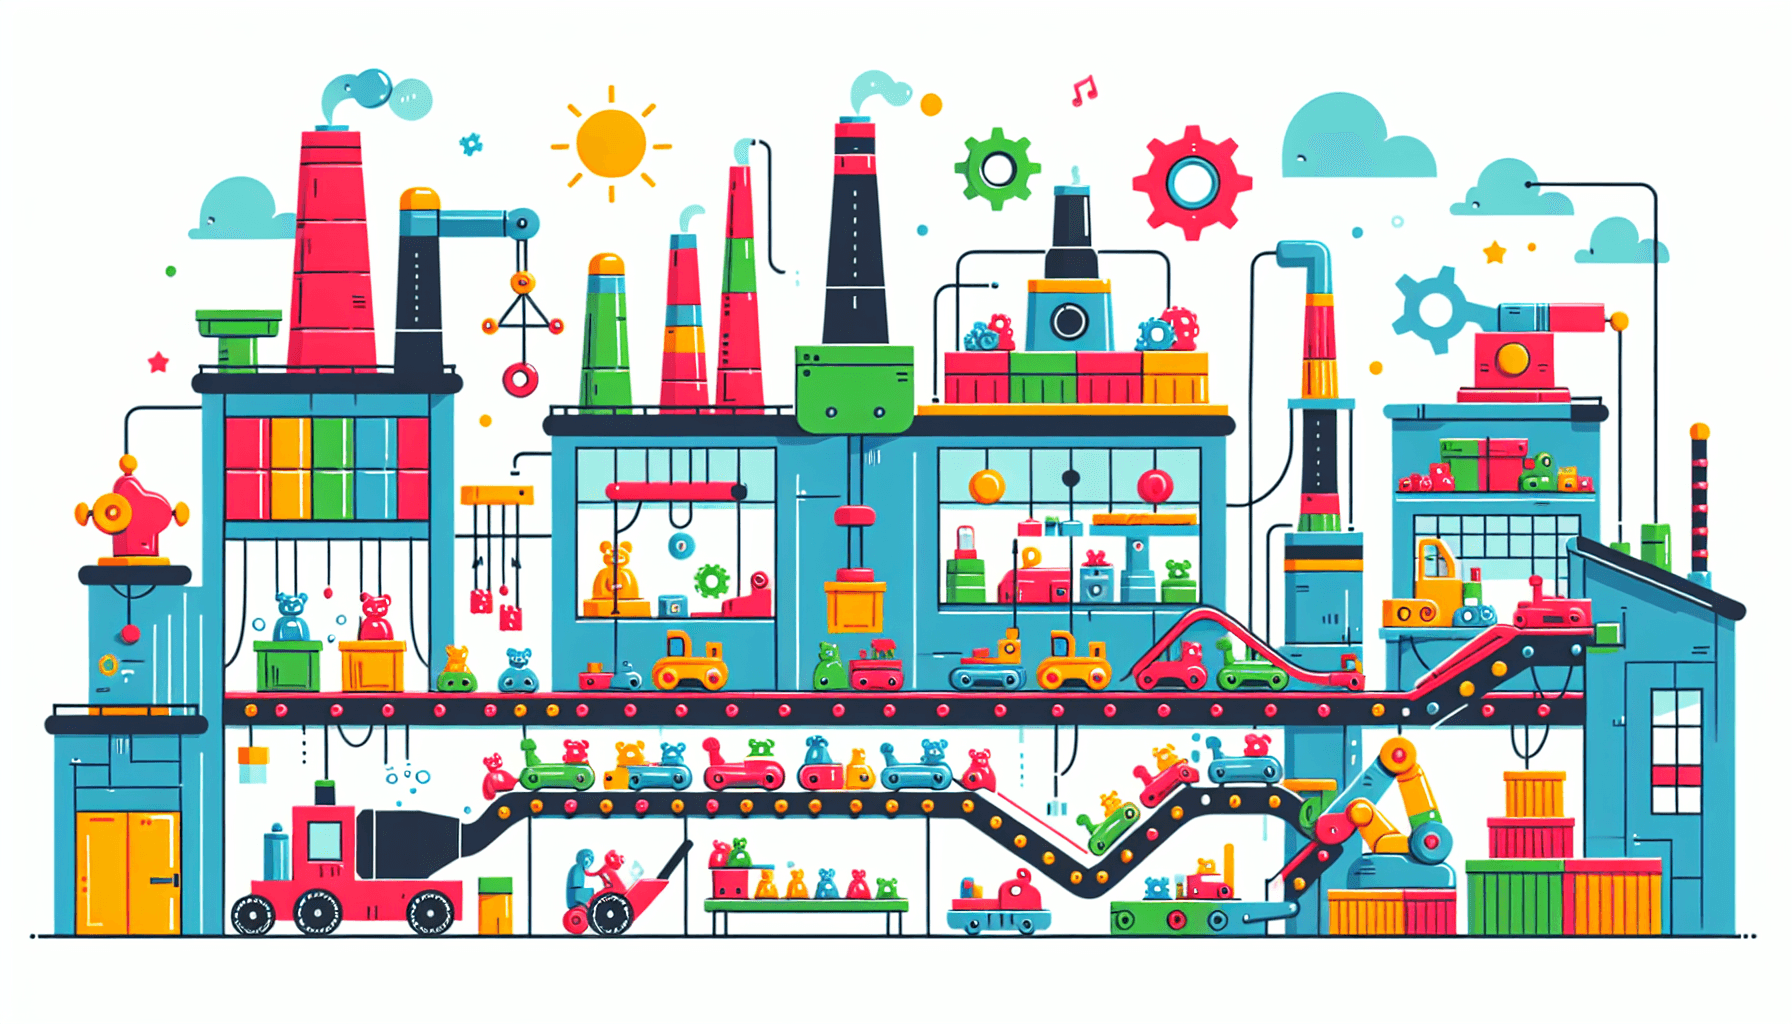 Toy factory in flat illustration style and white background, red #f47574, green #88c7a8, yellow #fcc44b, and blue #645bc8 colors.